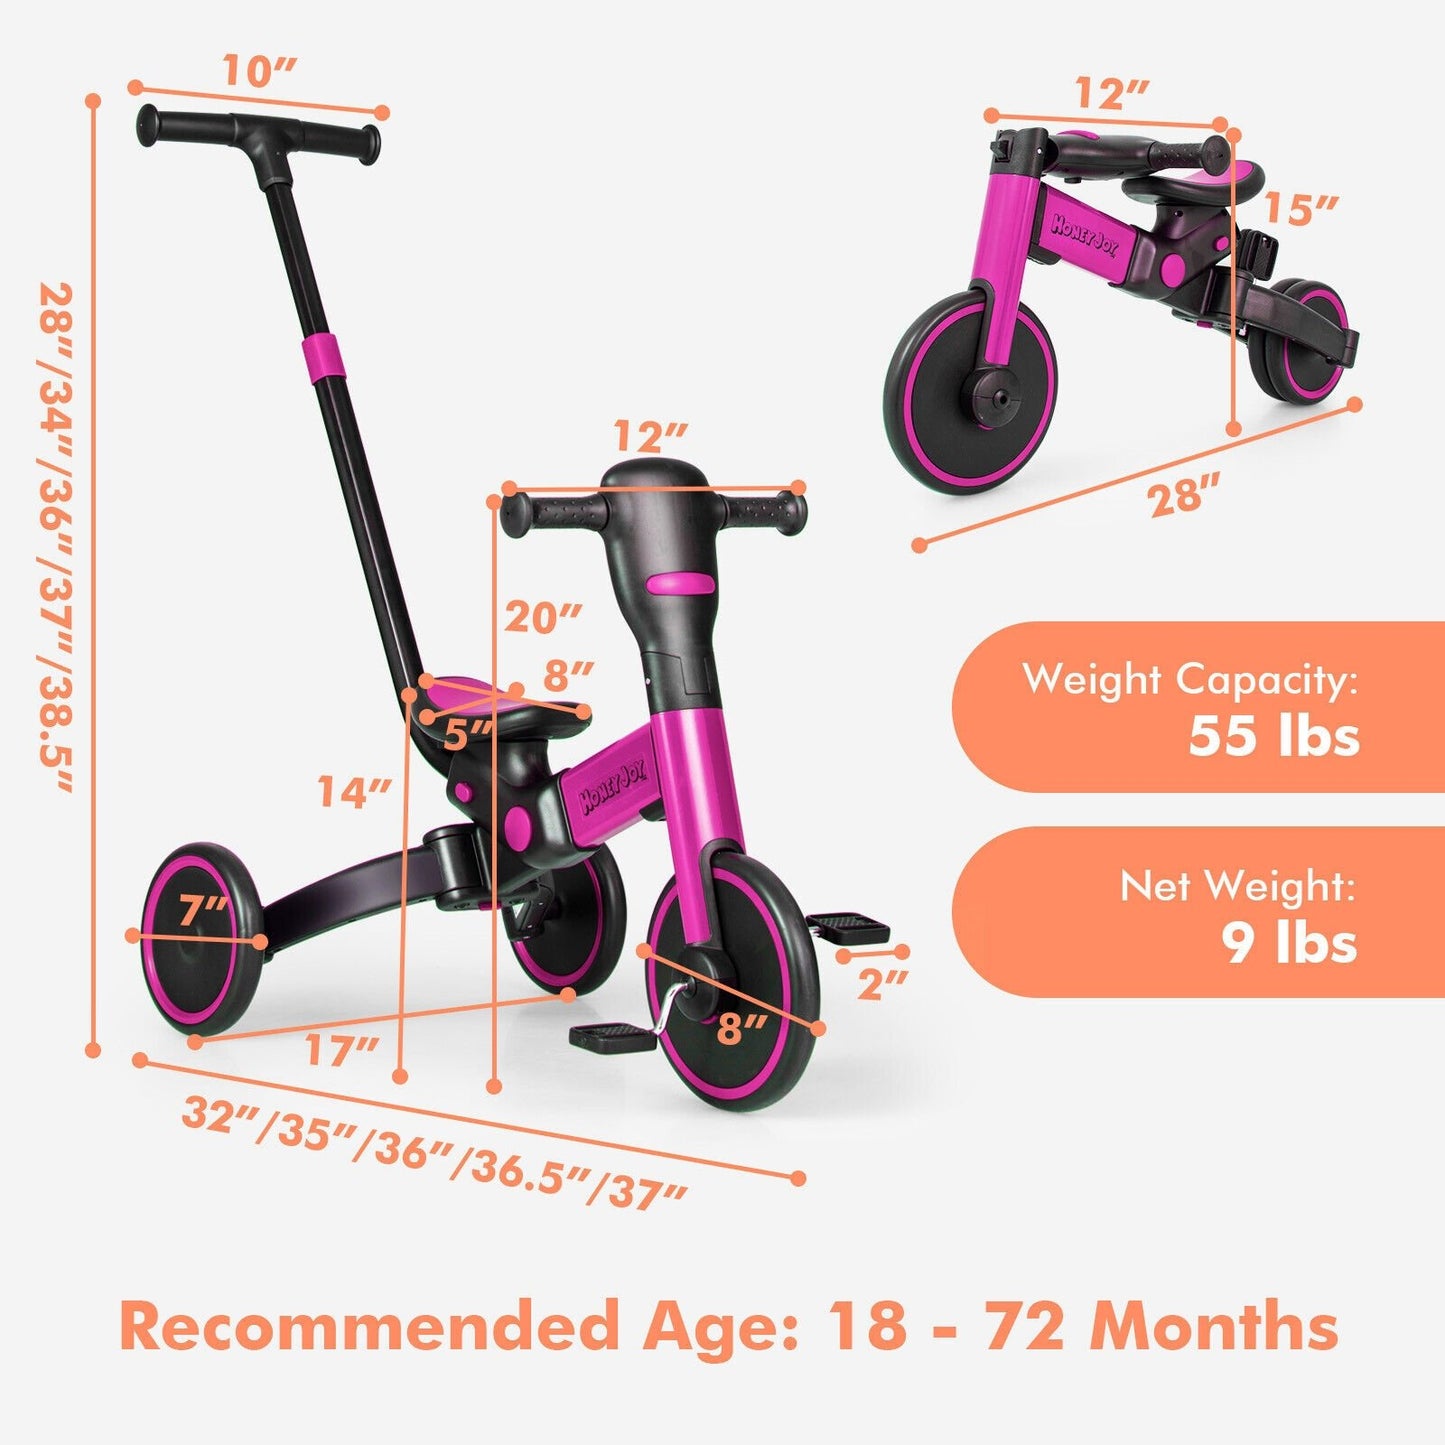 4-in-1 Kids Tricycle with Adjustable Parent Push Handle and Detachable Pedals, Pink